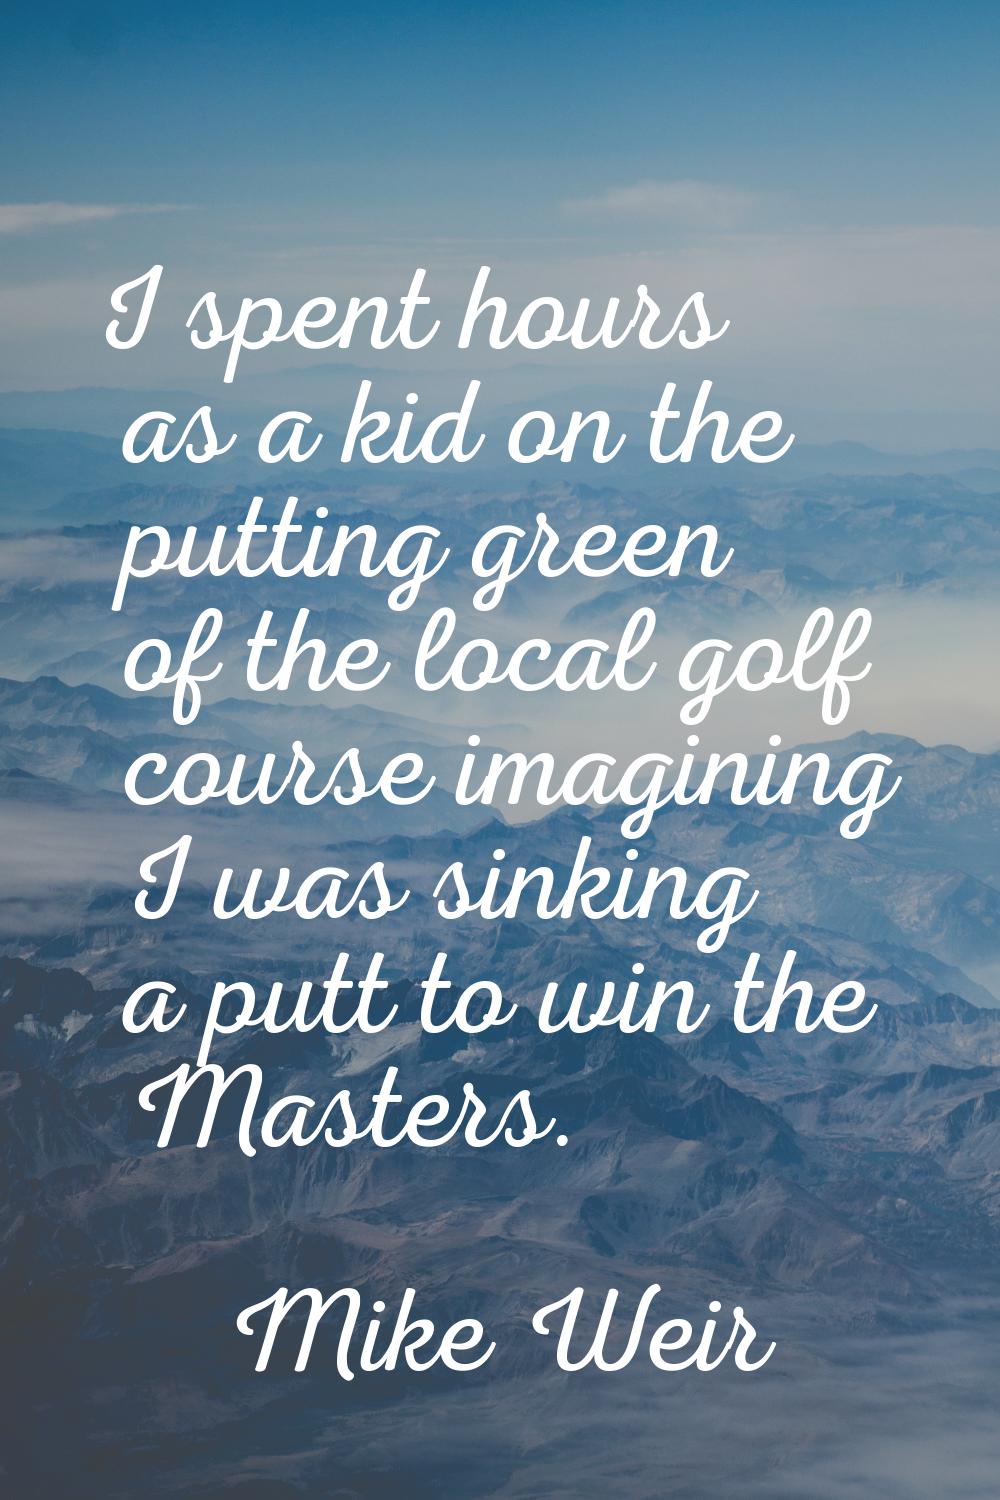 I spent hours as a kid on the putting green of the local golf course imagining I was sinking a putt